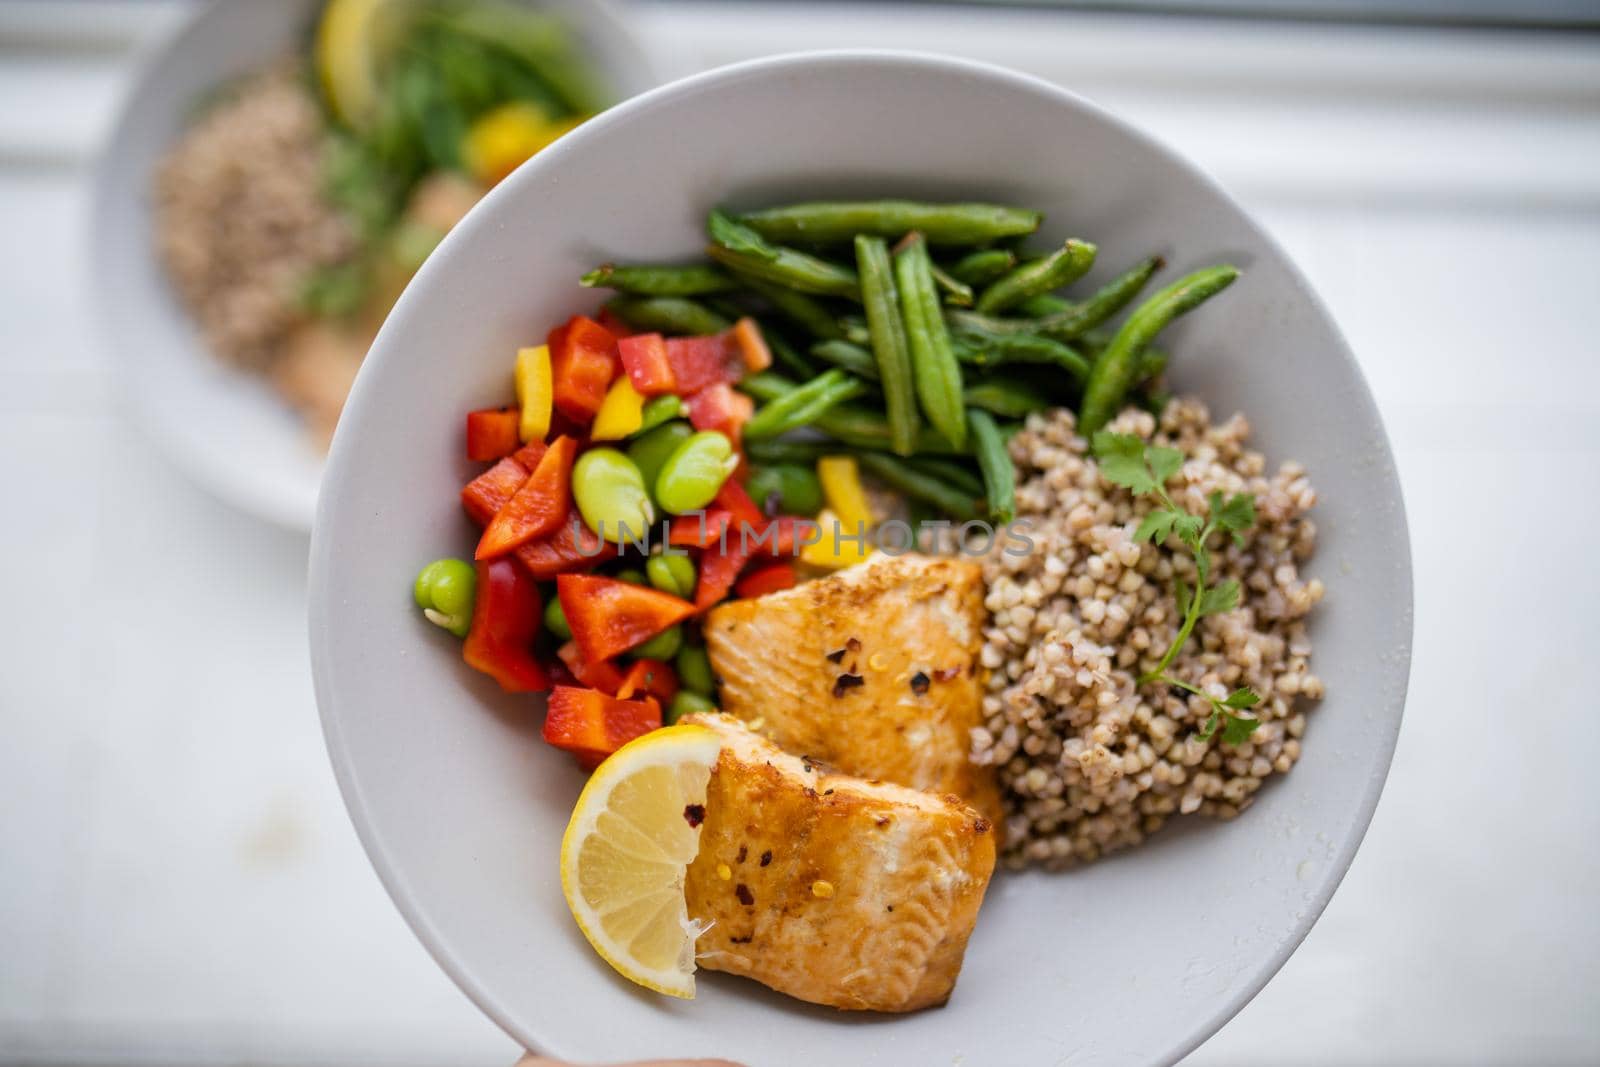 Top view of salmon and buckwheat dish with green beans, broad beans, and tomato slices. Nutritious dish with vegetables and fish on white plate. Healthy balanced diet